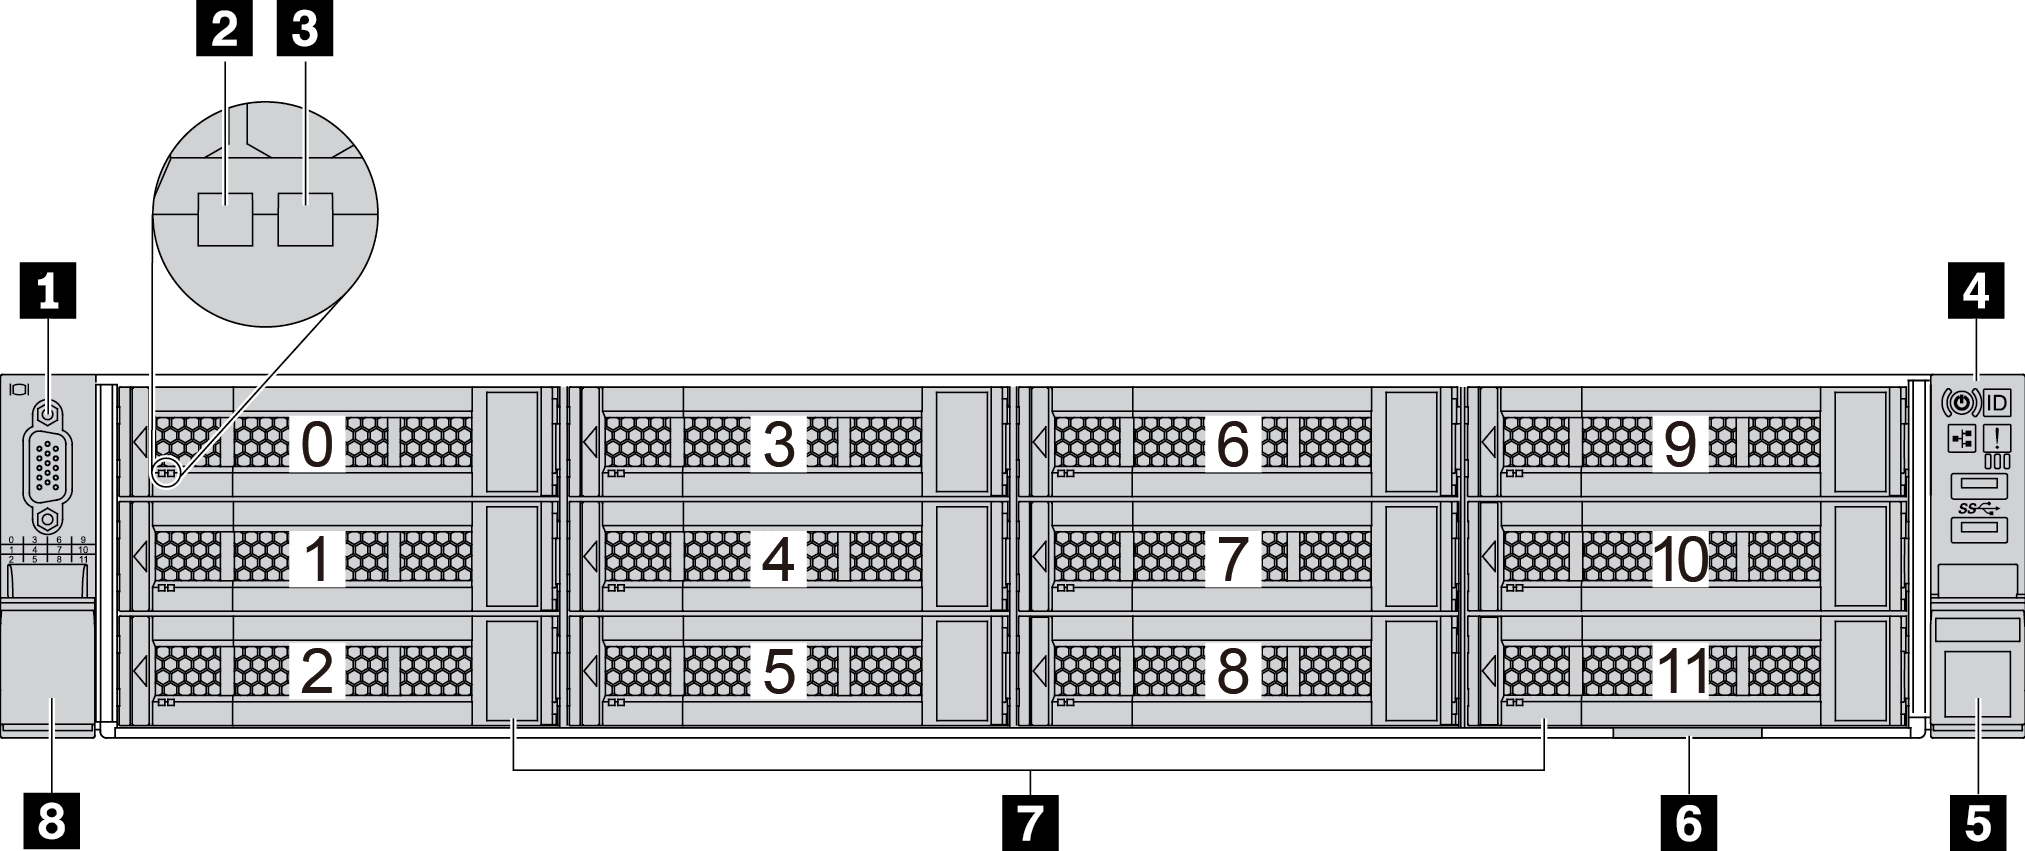 Front view of server models with twelve 3.5-inch drive bays